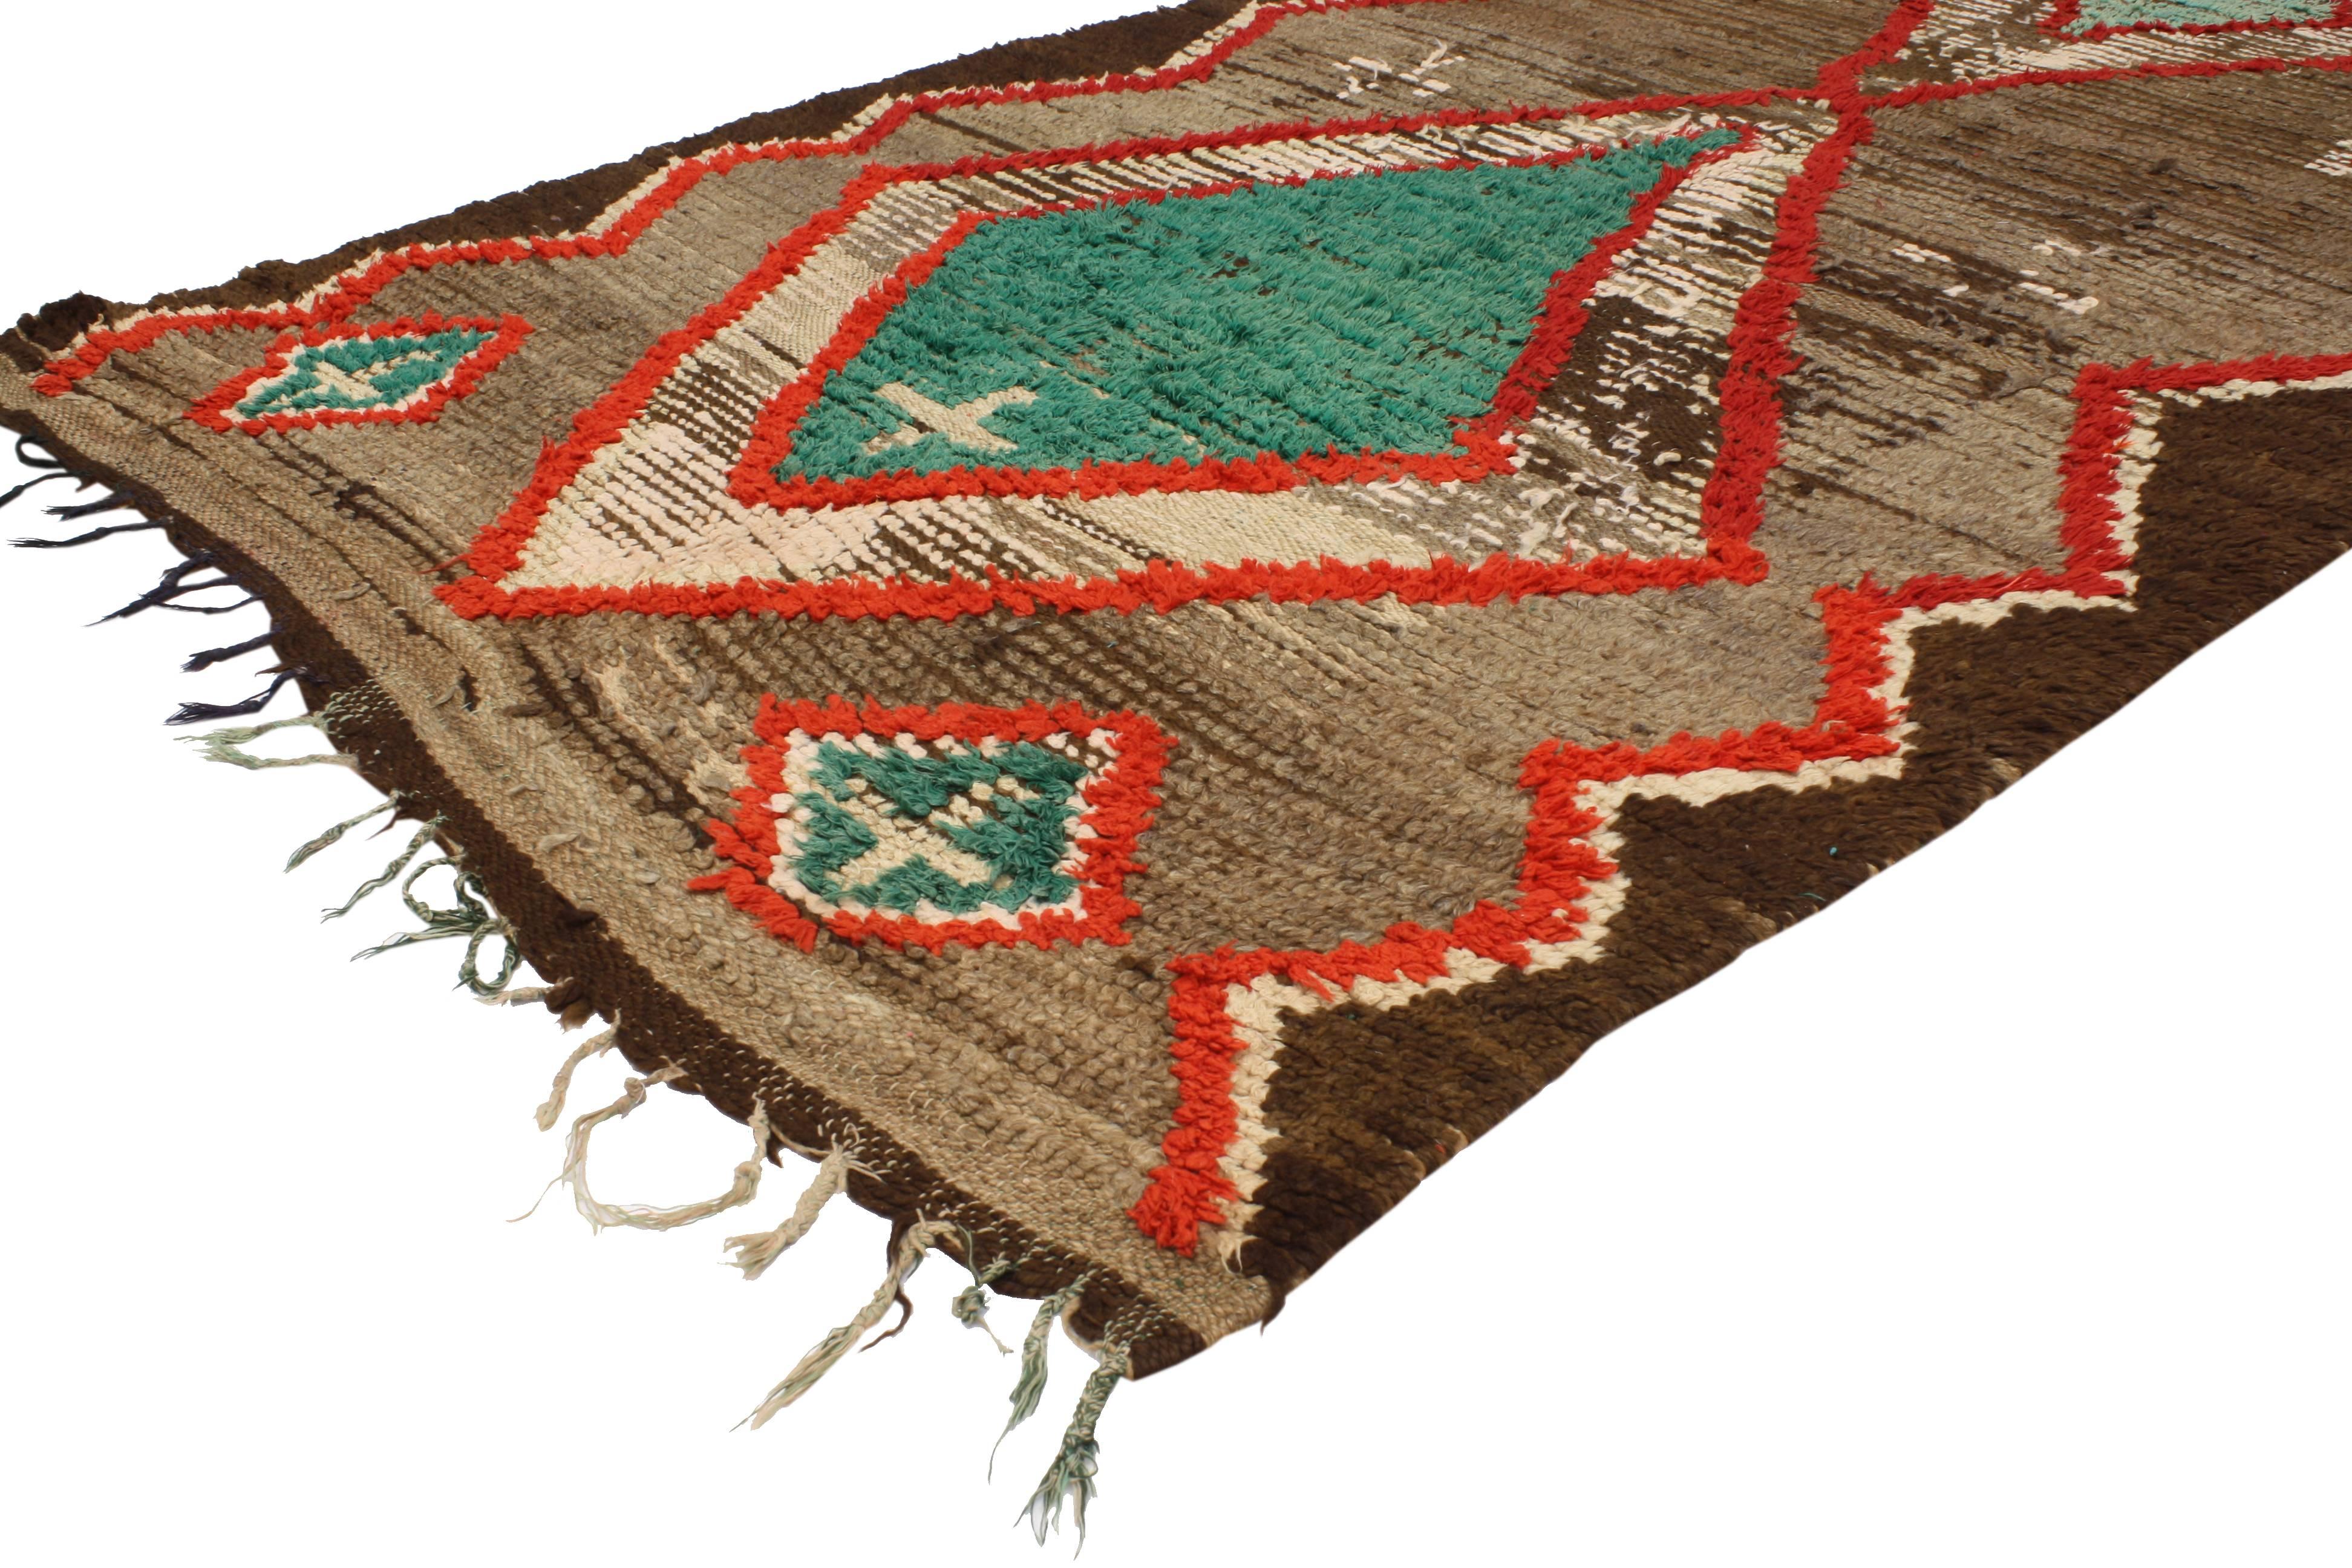 20370 Vintage Berber Moroccan Rug with Mid-Century Modern Style. Lacking a written language that has been passed down for hundreds of years, the tribal motifs found in this Moroccan rug connect the nomadic Berber tribe history with today's modern